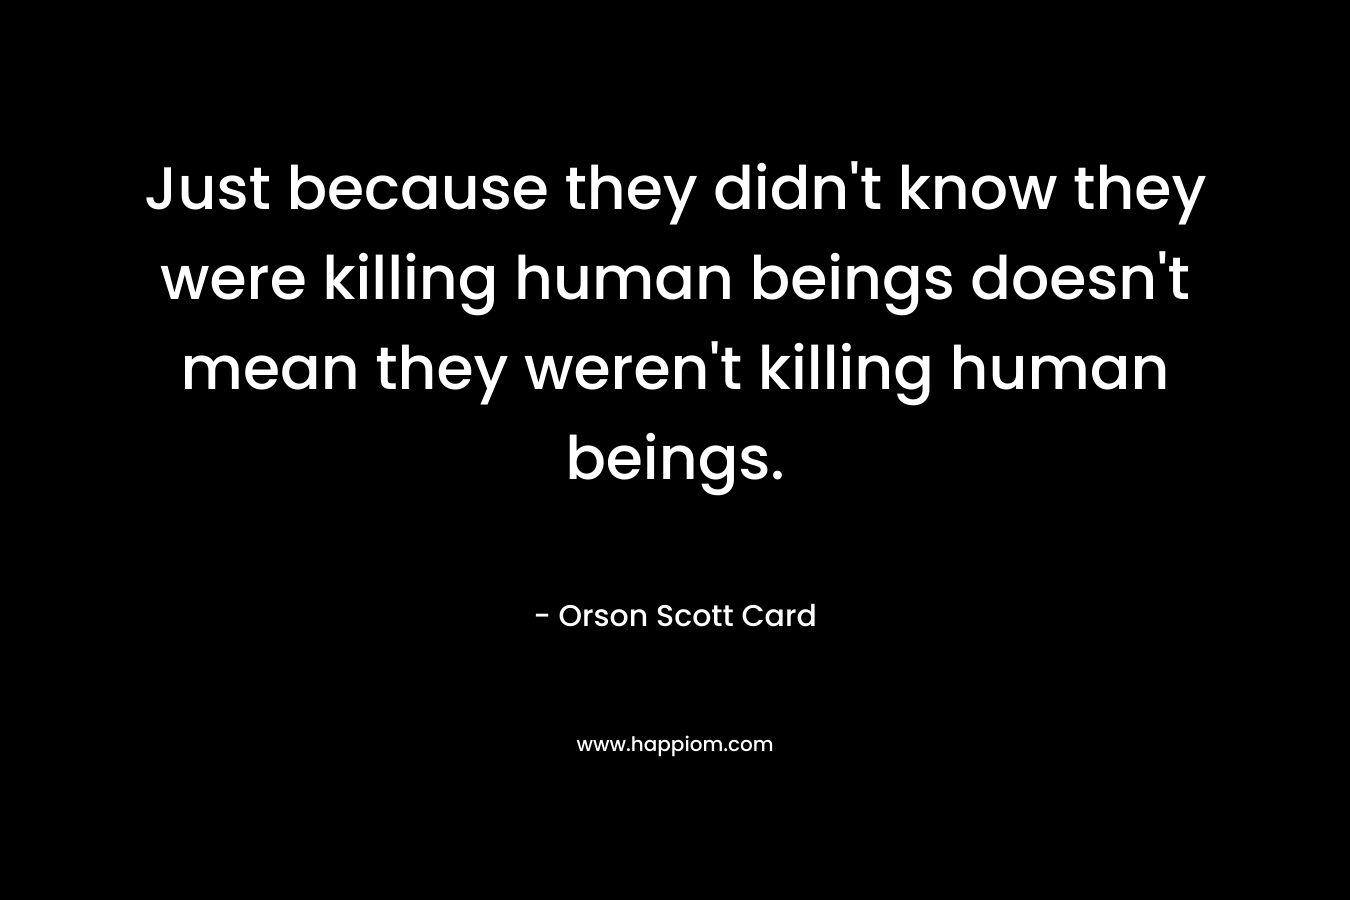 Just because they didn’t know they were killing human beings doesn’t mean they weren’t killing human beings. – Orson Scott Card